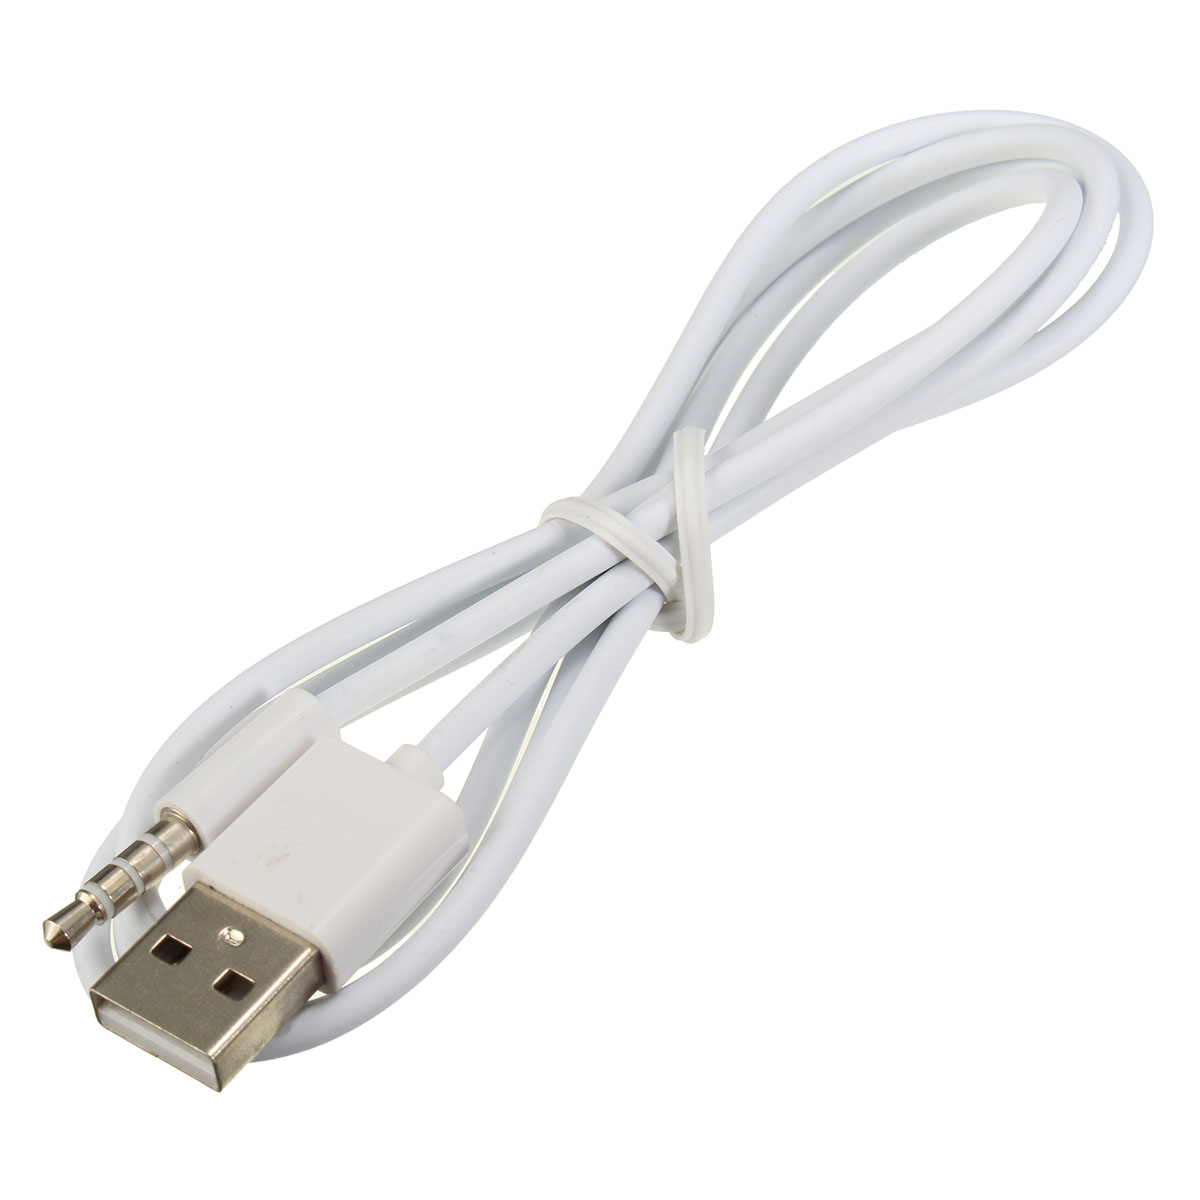 3.5mm AUX Audio Plug Jack to USB 2.0 Male Charge Cable Adapter Cord Car MP3 iPod